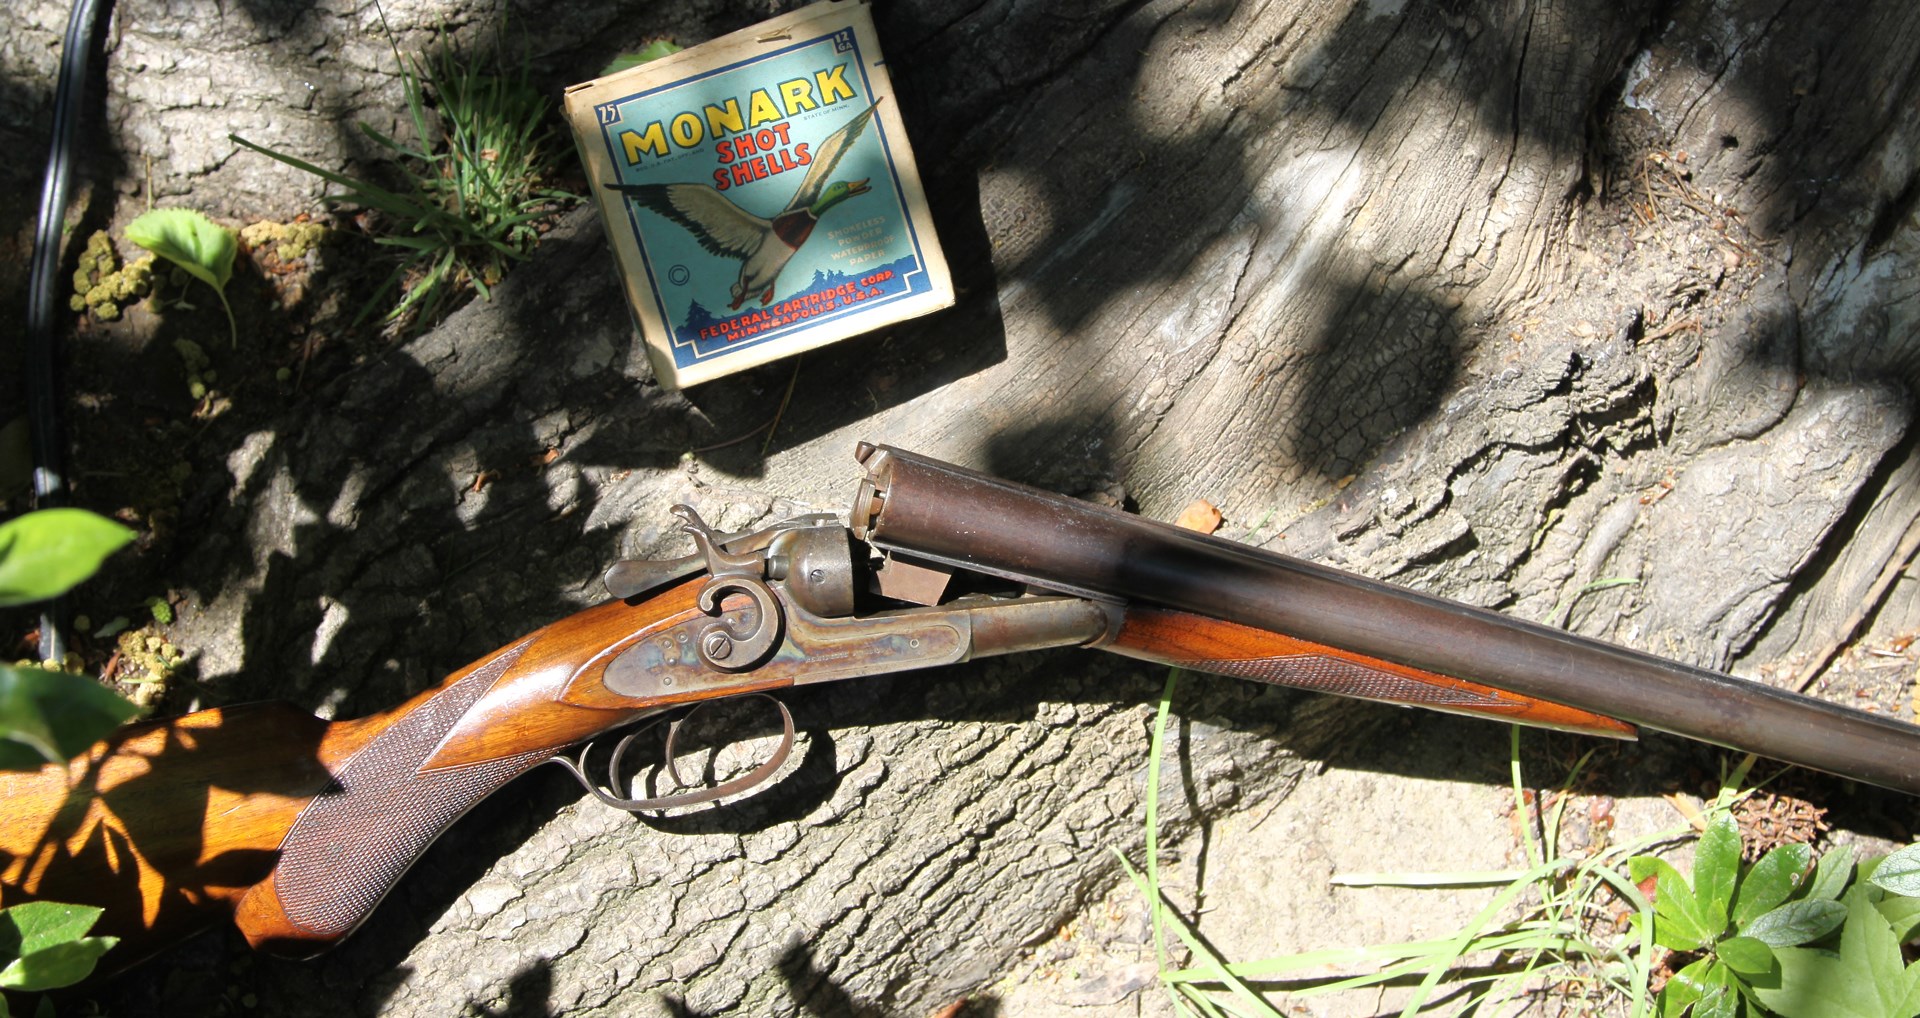 Older shotguns, such as author’s Remington New Model 1889, with its matted rib, rebounding hammers, case hardened sideplates, and hand-checkered pistol grip, should only be fired with low-pressure loads using Bismuth or lead shot; these guns were not made for steel or tungsten shot.